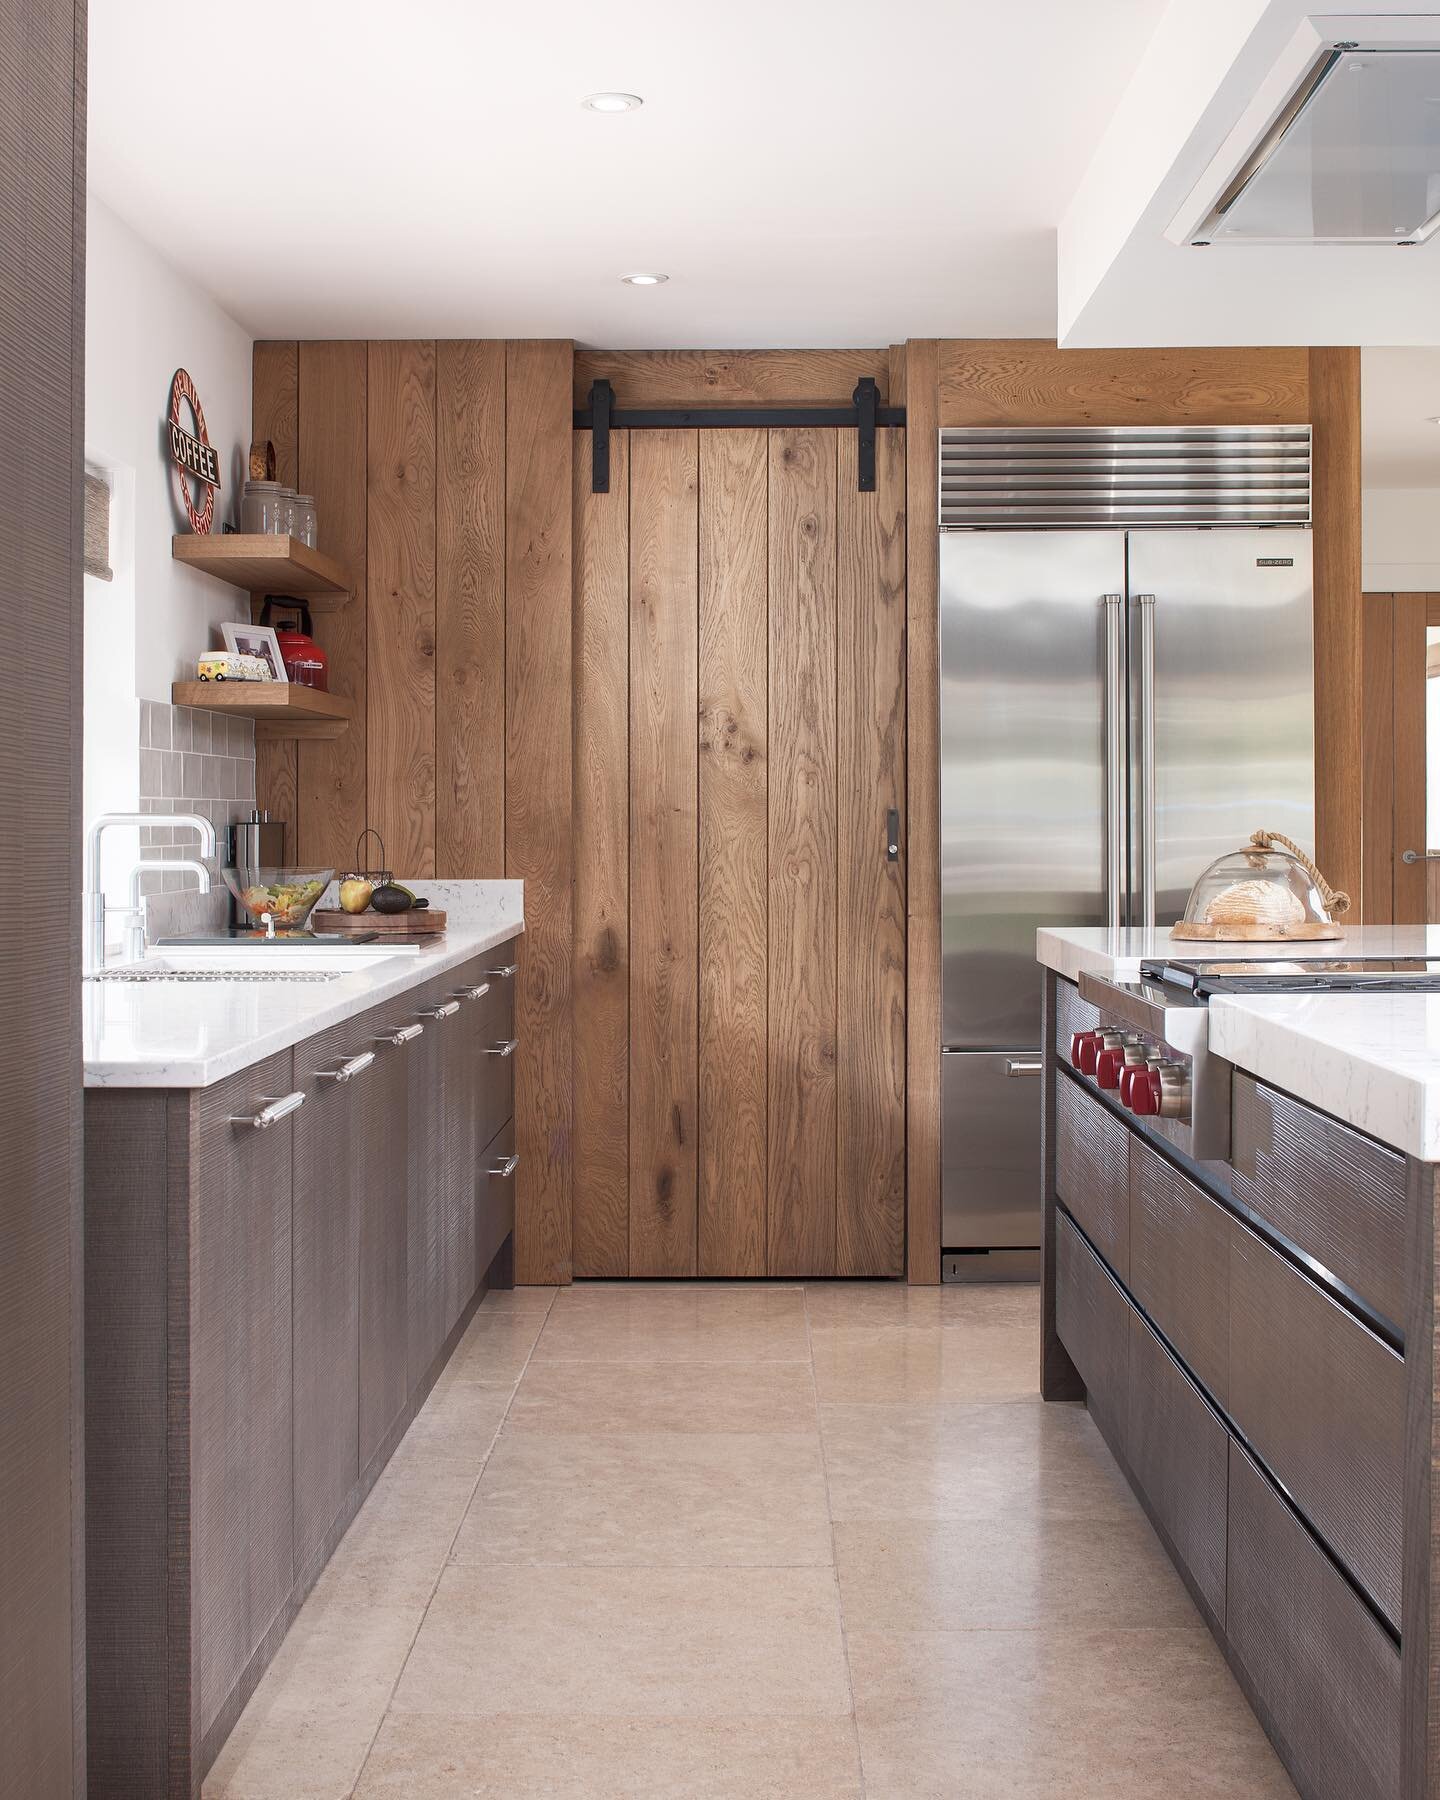 &bull; 𝐒𝐰𝐢𝐩𝐞 𝐓𝐨 𝐑𝐞𝐯𝐞𝐚𝐥 𝐓𝐡𝐞 𝐇𝐢𝐝𝐝𝐞𝐧 𝐏𝐚𝐧𝐭𝐫𝐲!

This band sawn oak kitchen from Braco Designs&rsquo; Ardoch range was designed and installed with the addition of a pocket barn door, opening to reveal the bespoke pantry which li